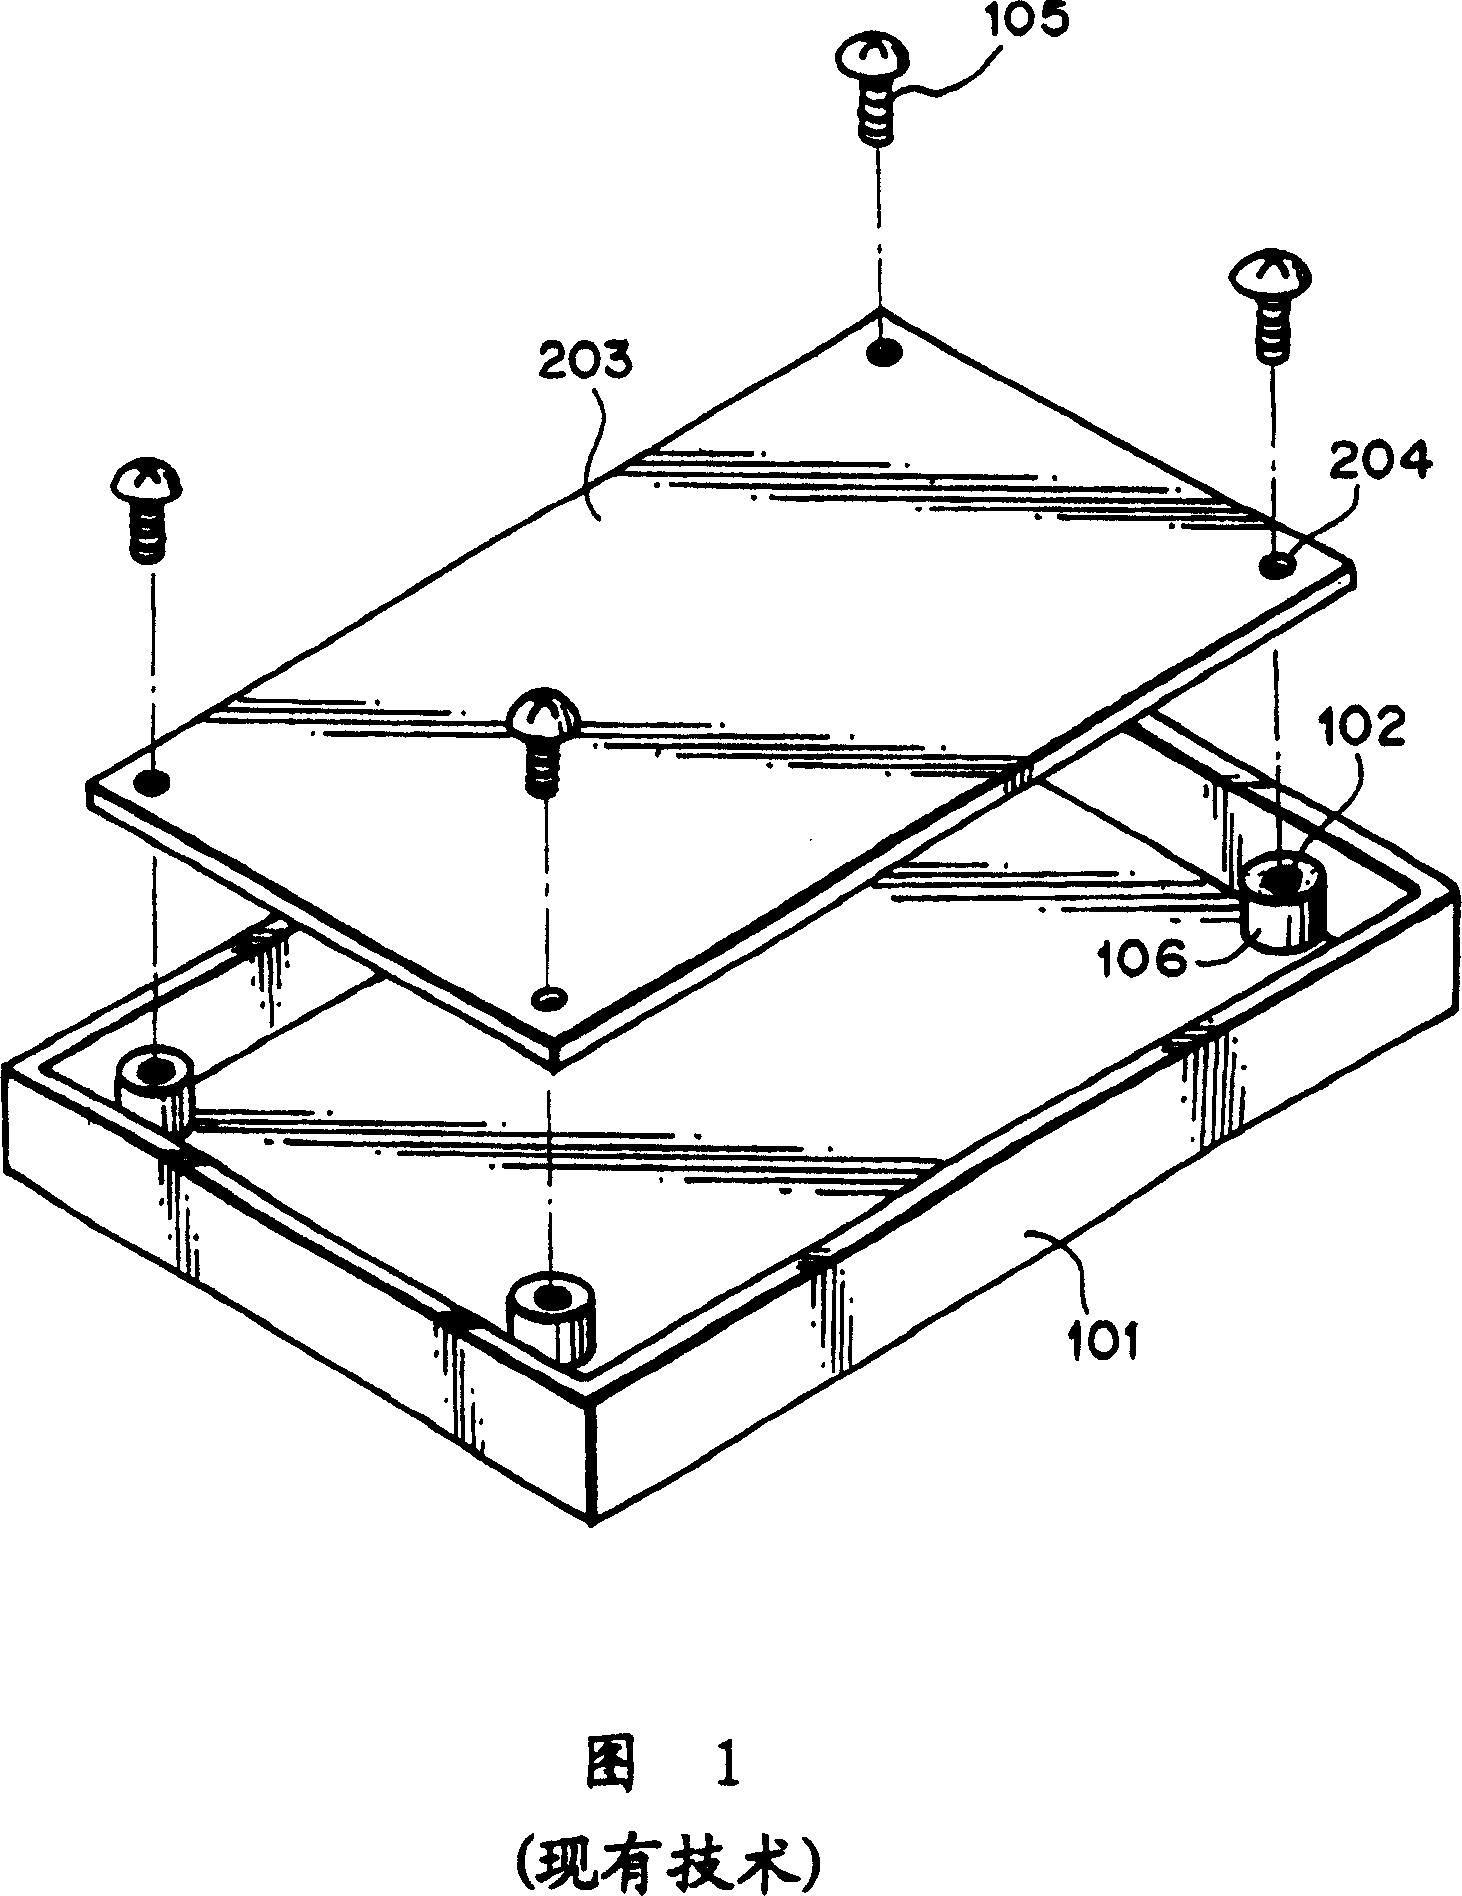 Deformation-resistant mounting for a circuit board in a portable device